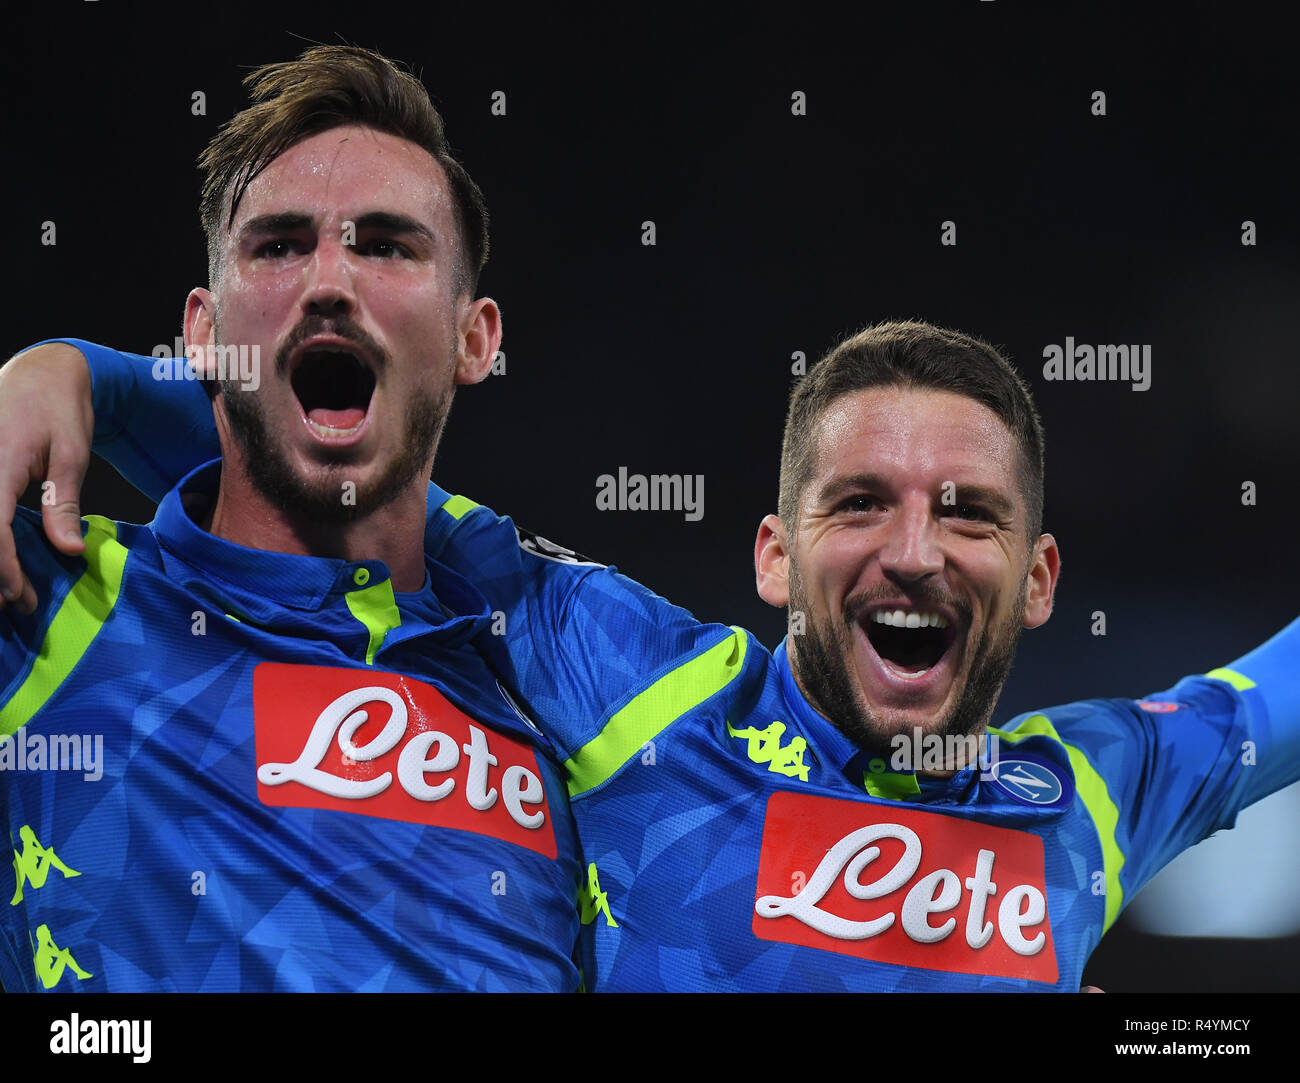 Naples, Italy. 28th Nov, 2018. Napoli's Dries Mertens (R) celebrates with his teammate Fabian Ruiz during the UEFA Champions League Group C match between Napoli and Red Star Belgrade in Naples, Italy, Nov. 28, 2018. Napoli won 3-1. Credit: Alberto Lingria/Xinhua/Alamy Live News Stock Photo